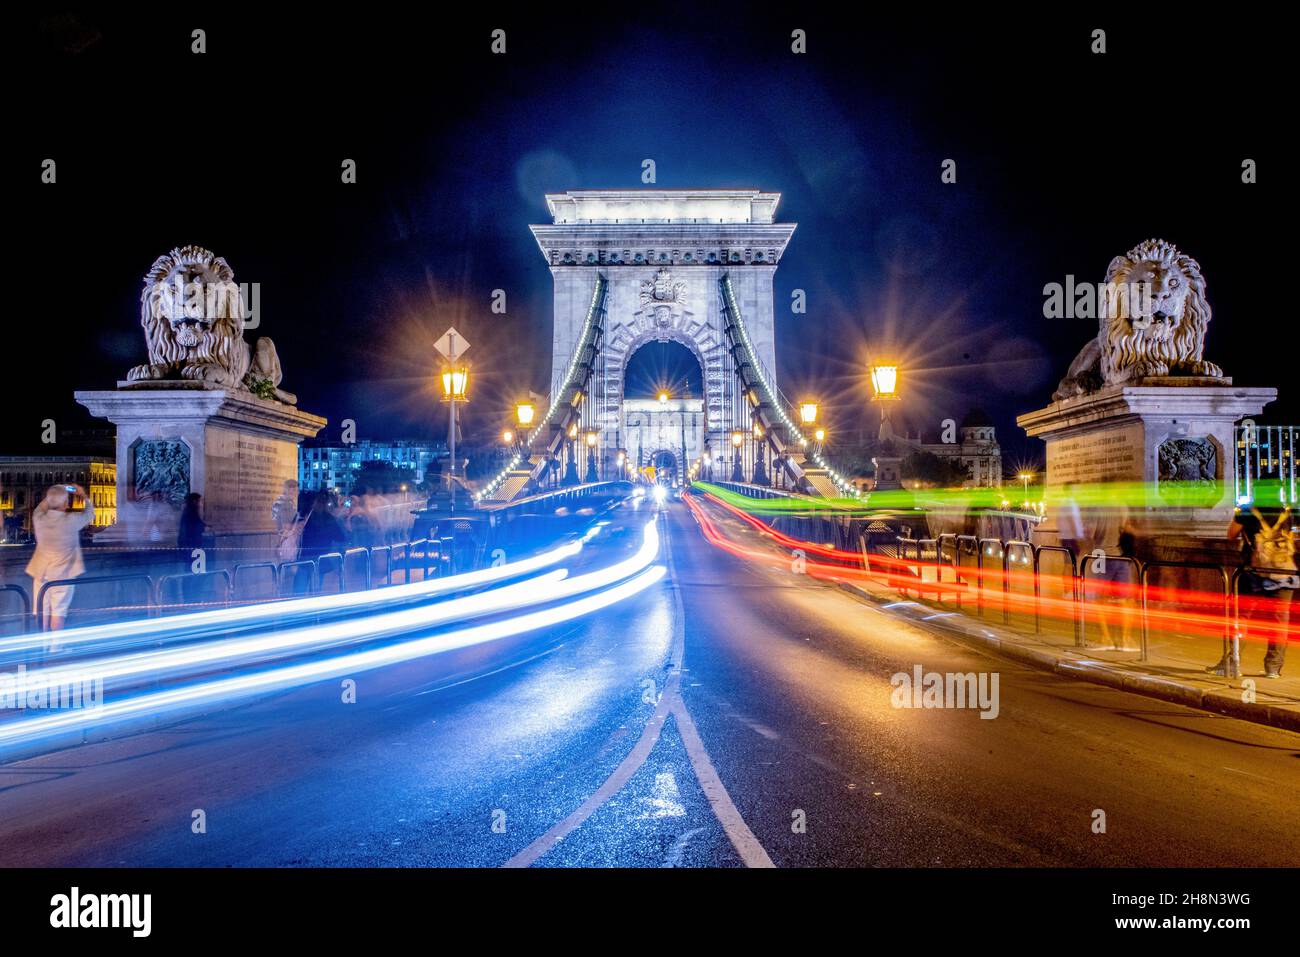 August 13th 2019 - Budapest, Hungary: Lion Statues in front of Chain Bridge (Hungarian: Széchenyi ) at night Stock Photo